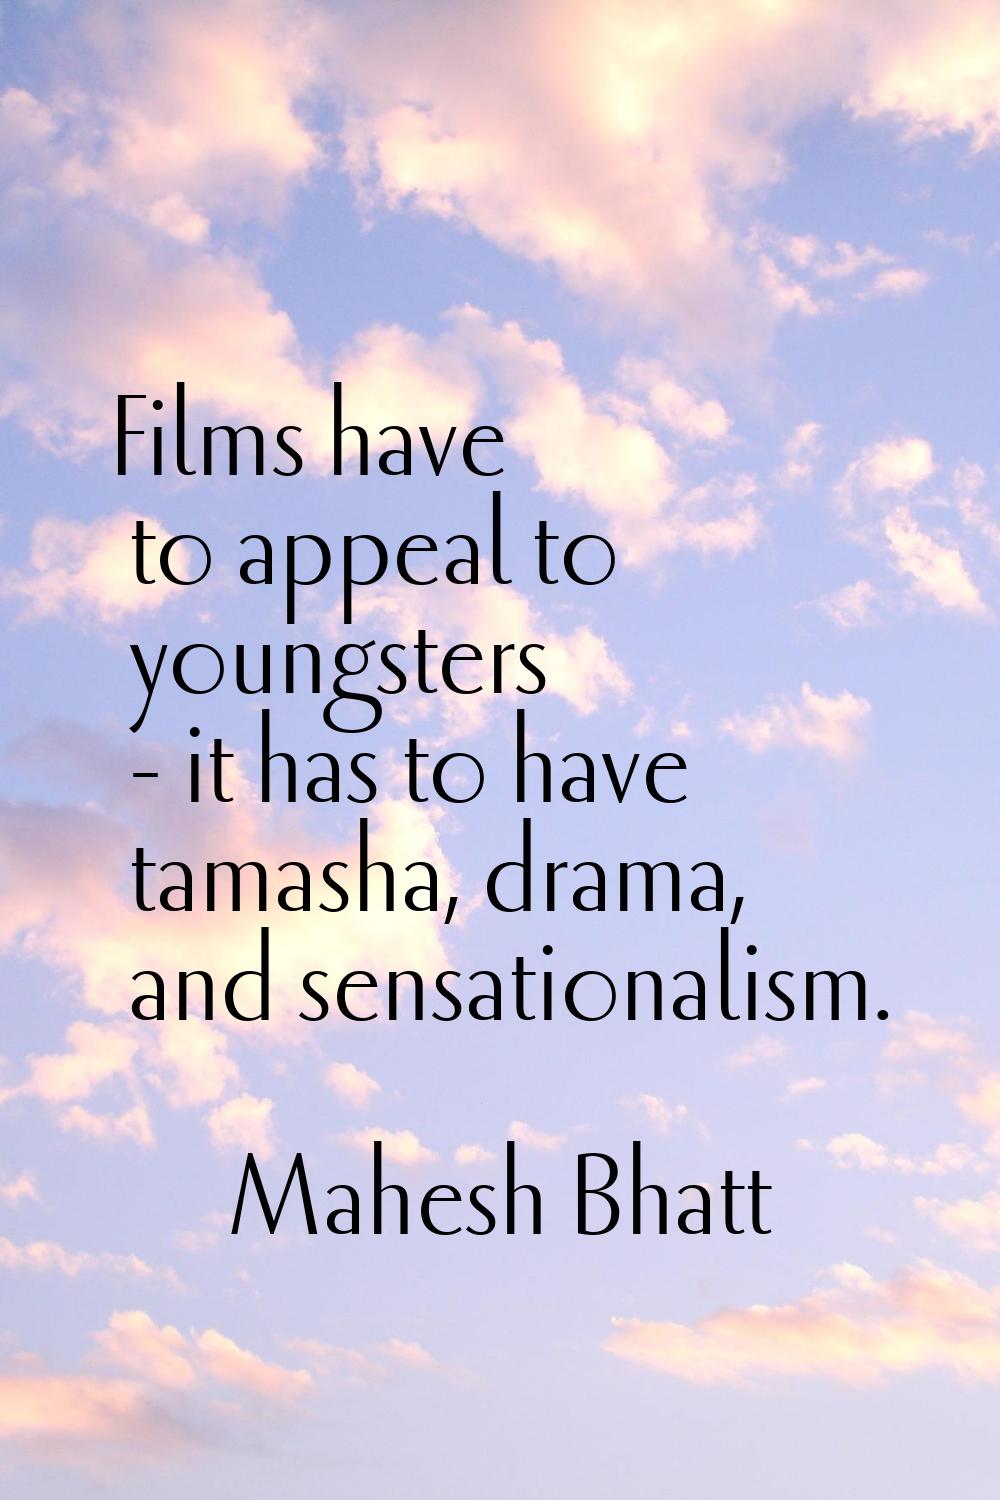 Films have to appeal to youngsters - it has to have tamasha, drama, and sensationalism.